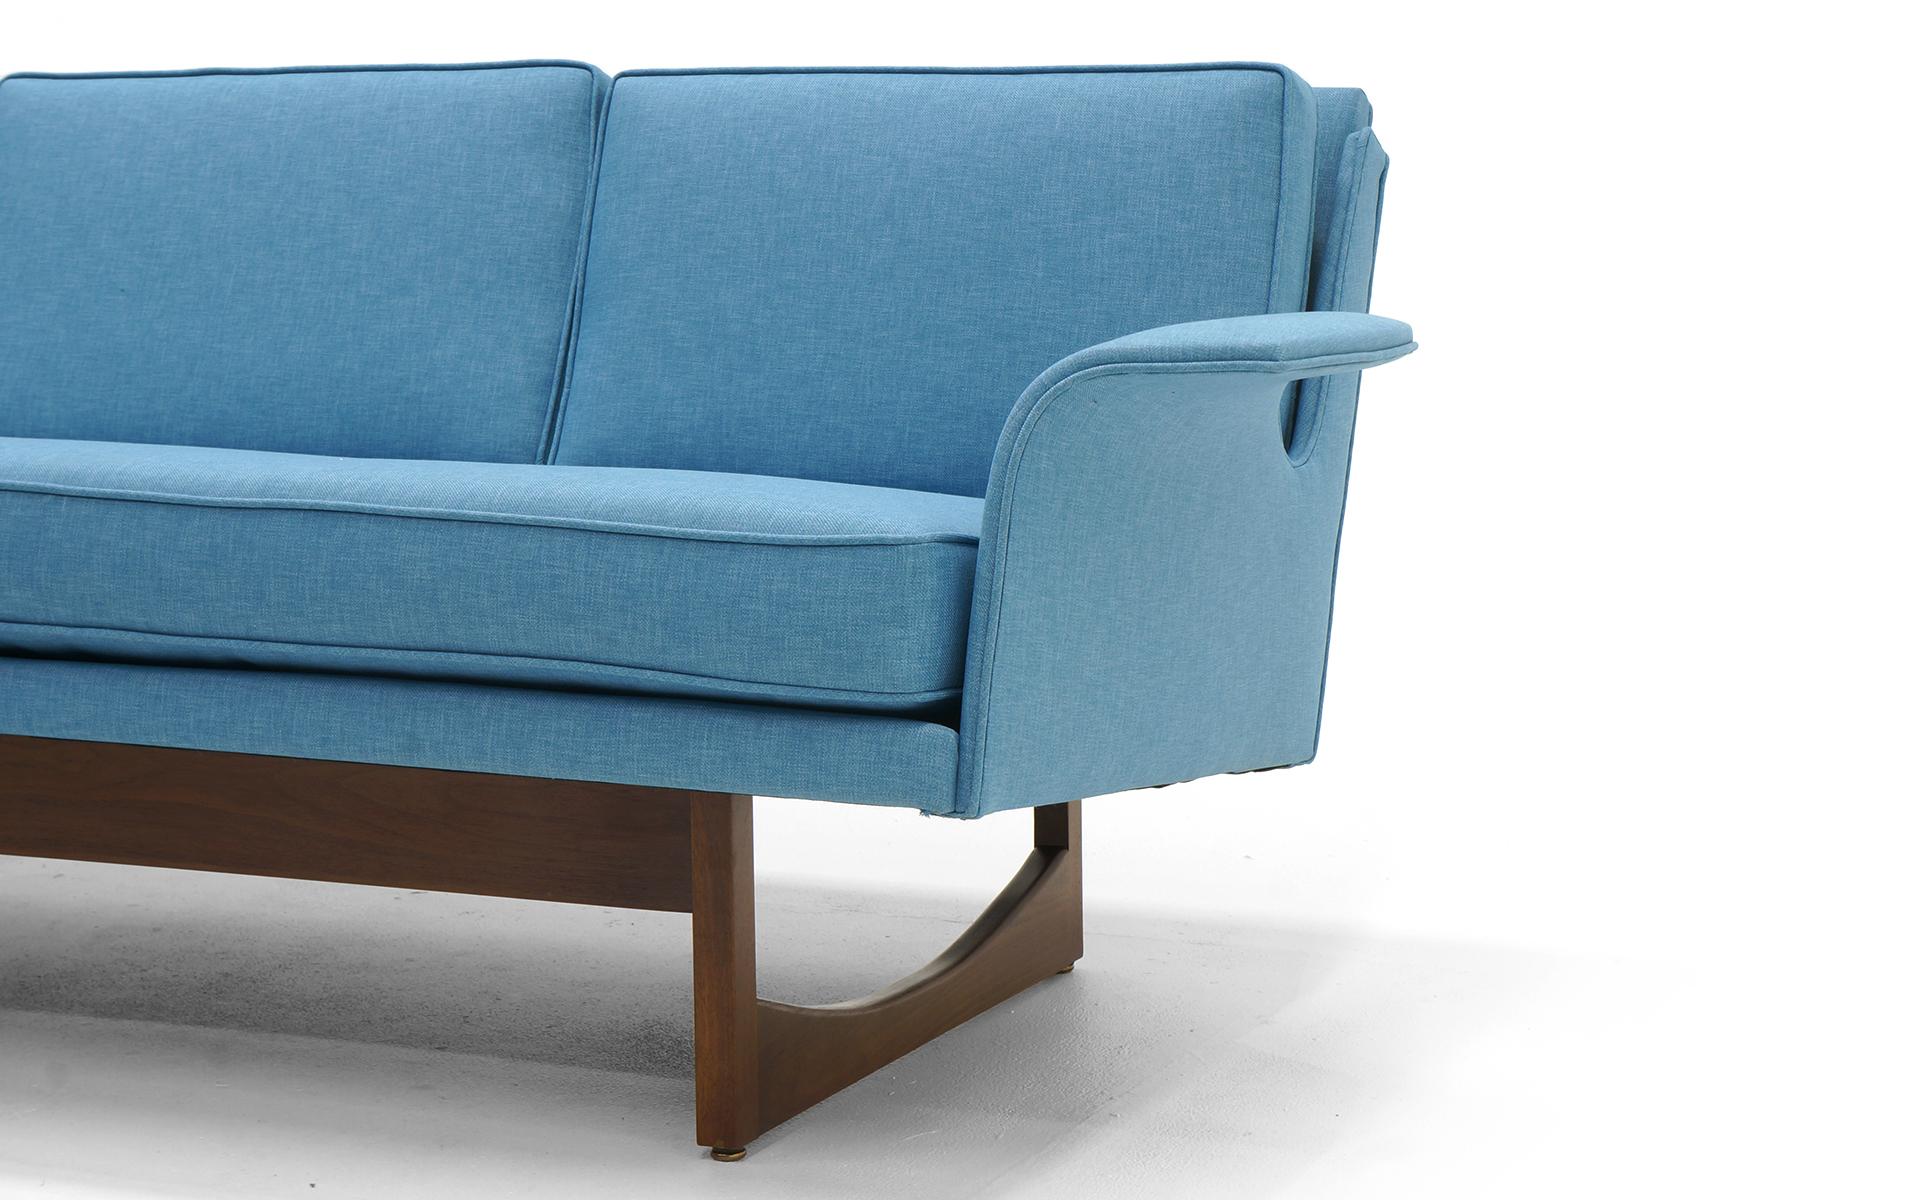 Mid-20th Century Four-Seat Sofa Possibly Danish Modern or Adrian Pearsall, Beautiful Blue Fabric